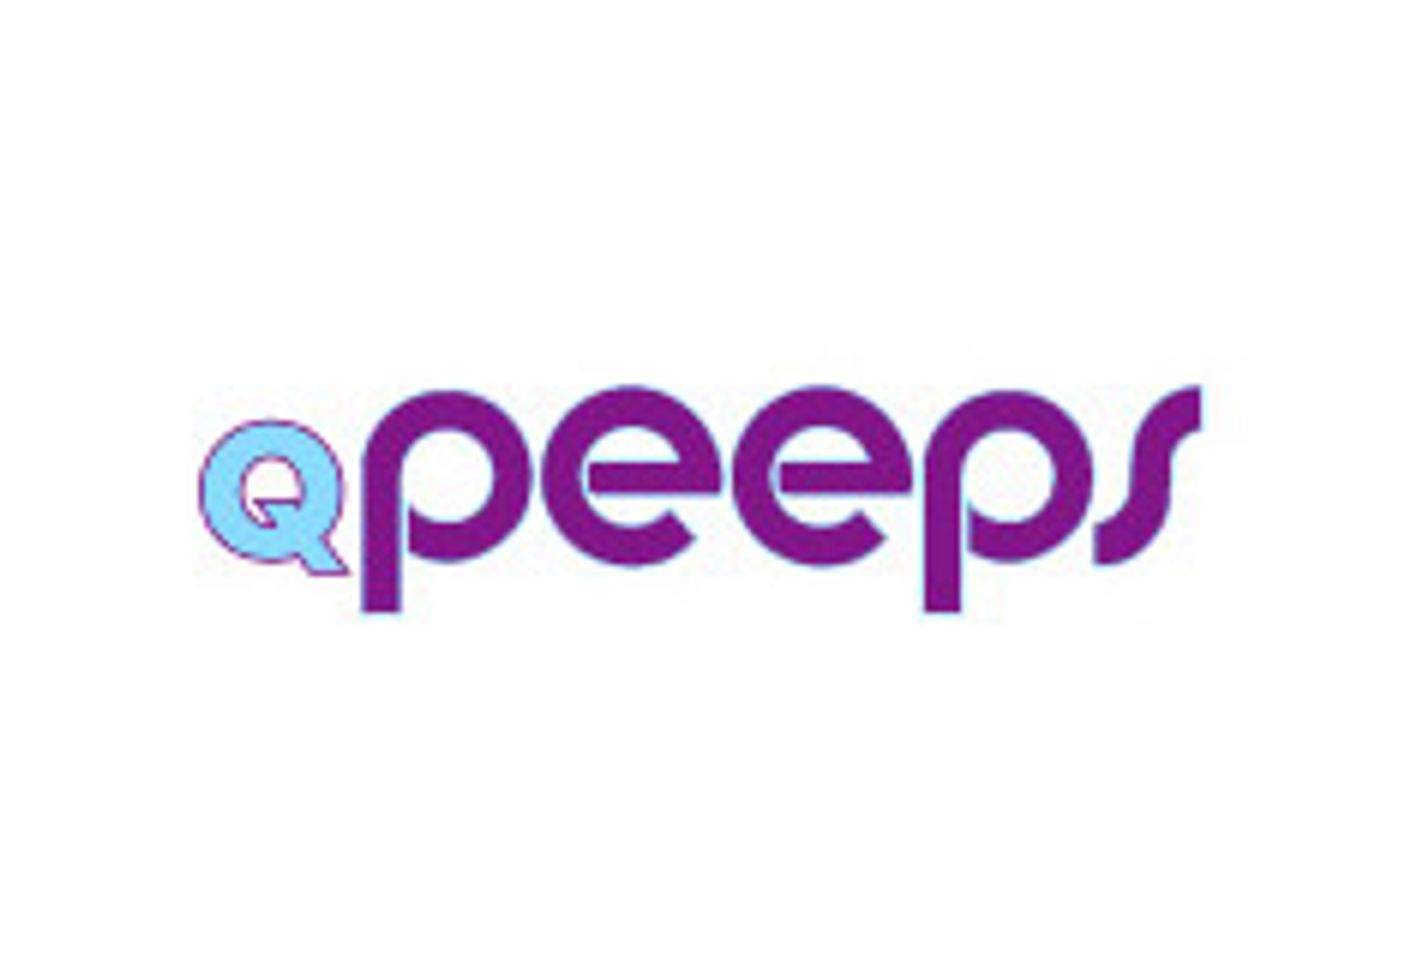 AEBN Launches qPeeps.com